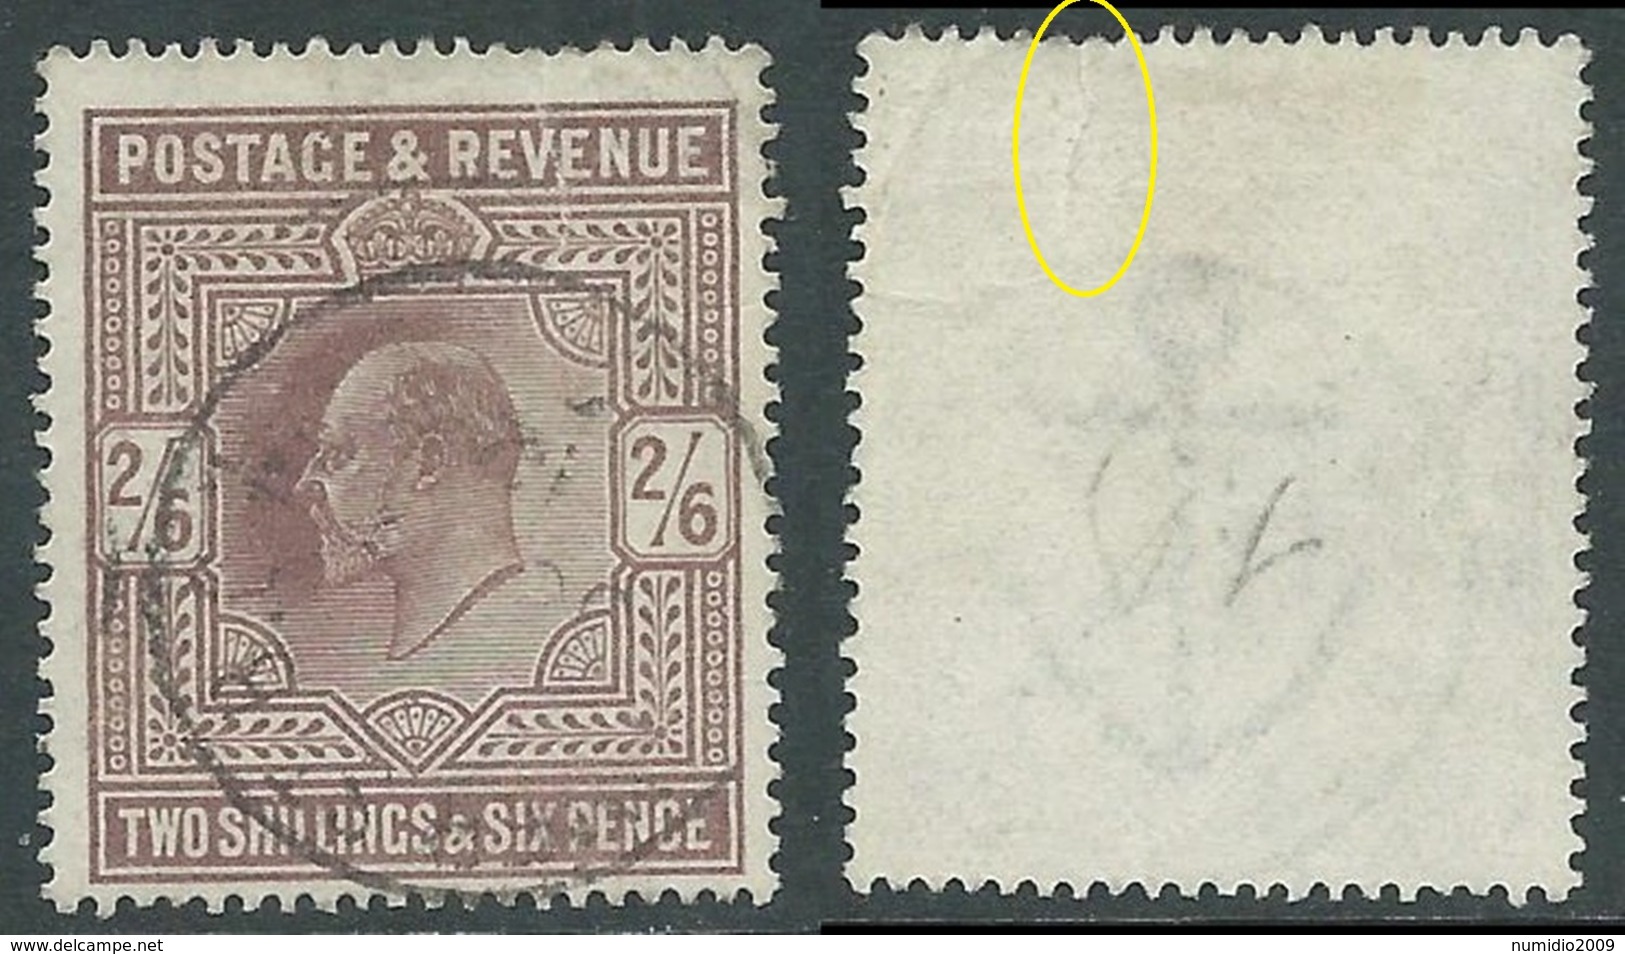 1902-10 GREAT BRITAIN USED SG 260 2s6d LILAC DEFECTIVE RIP - F21-9 - Usati